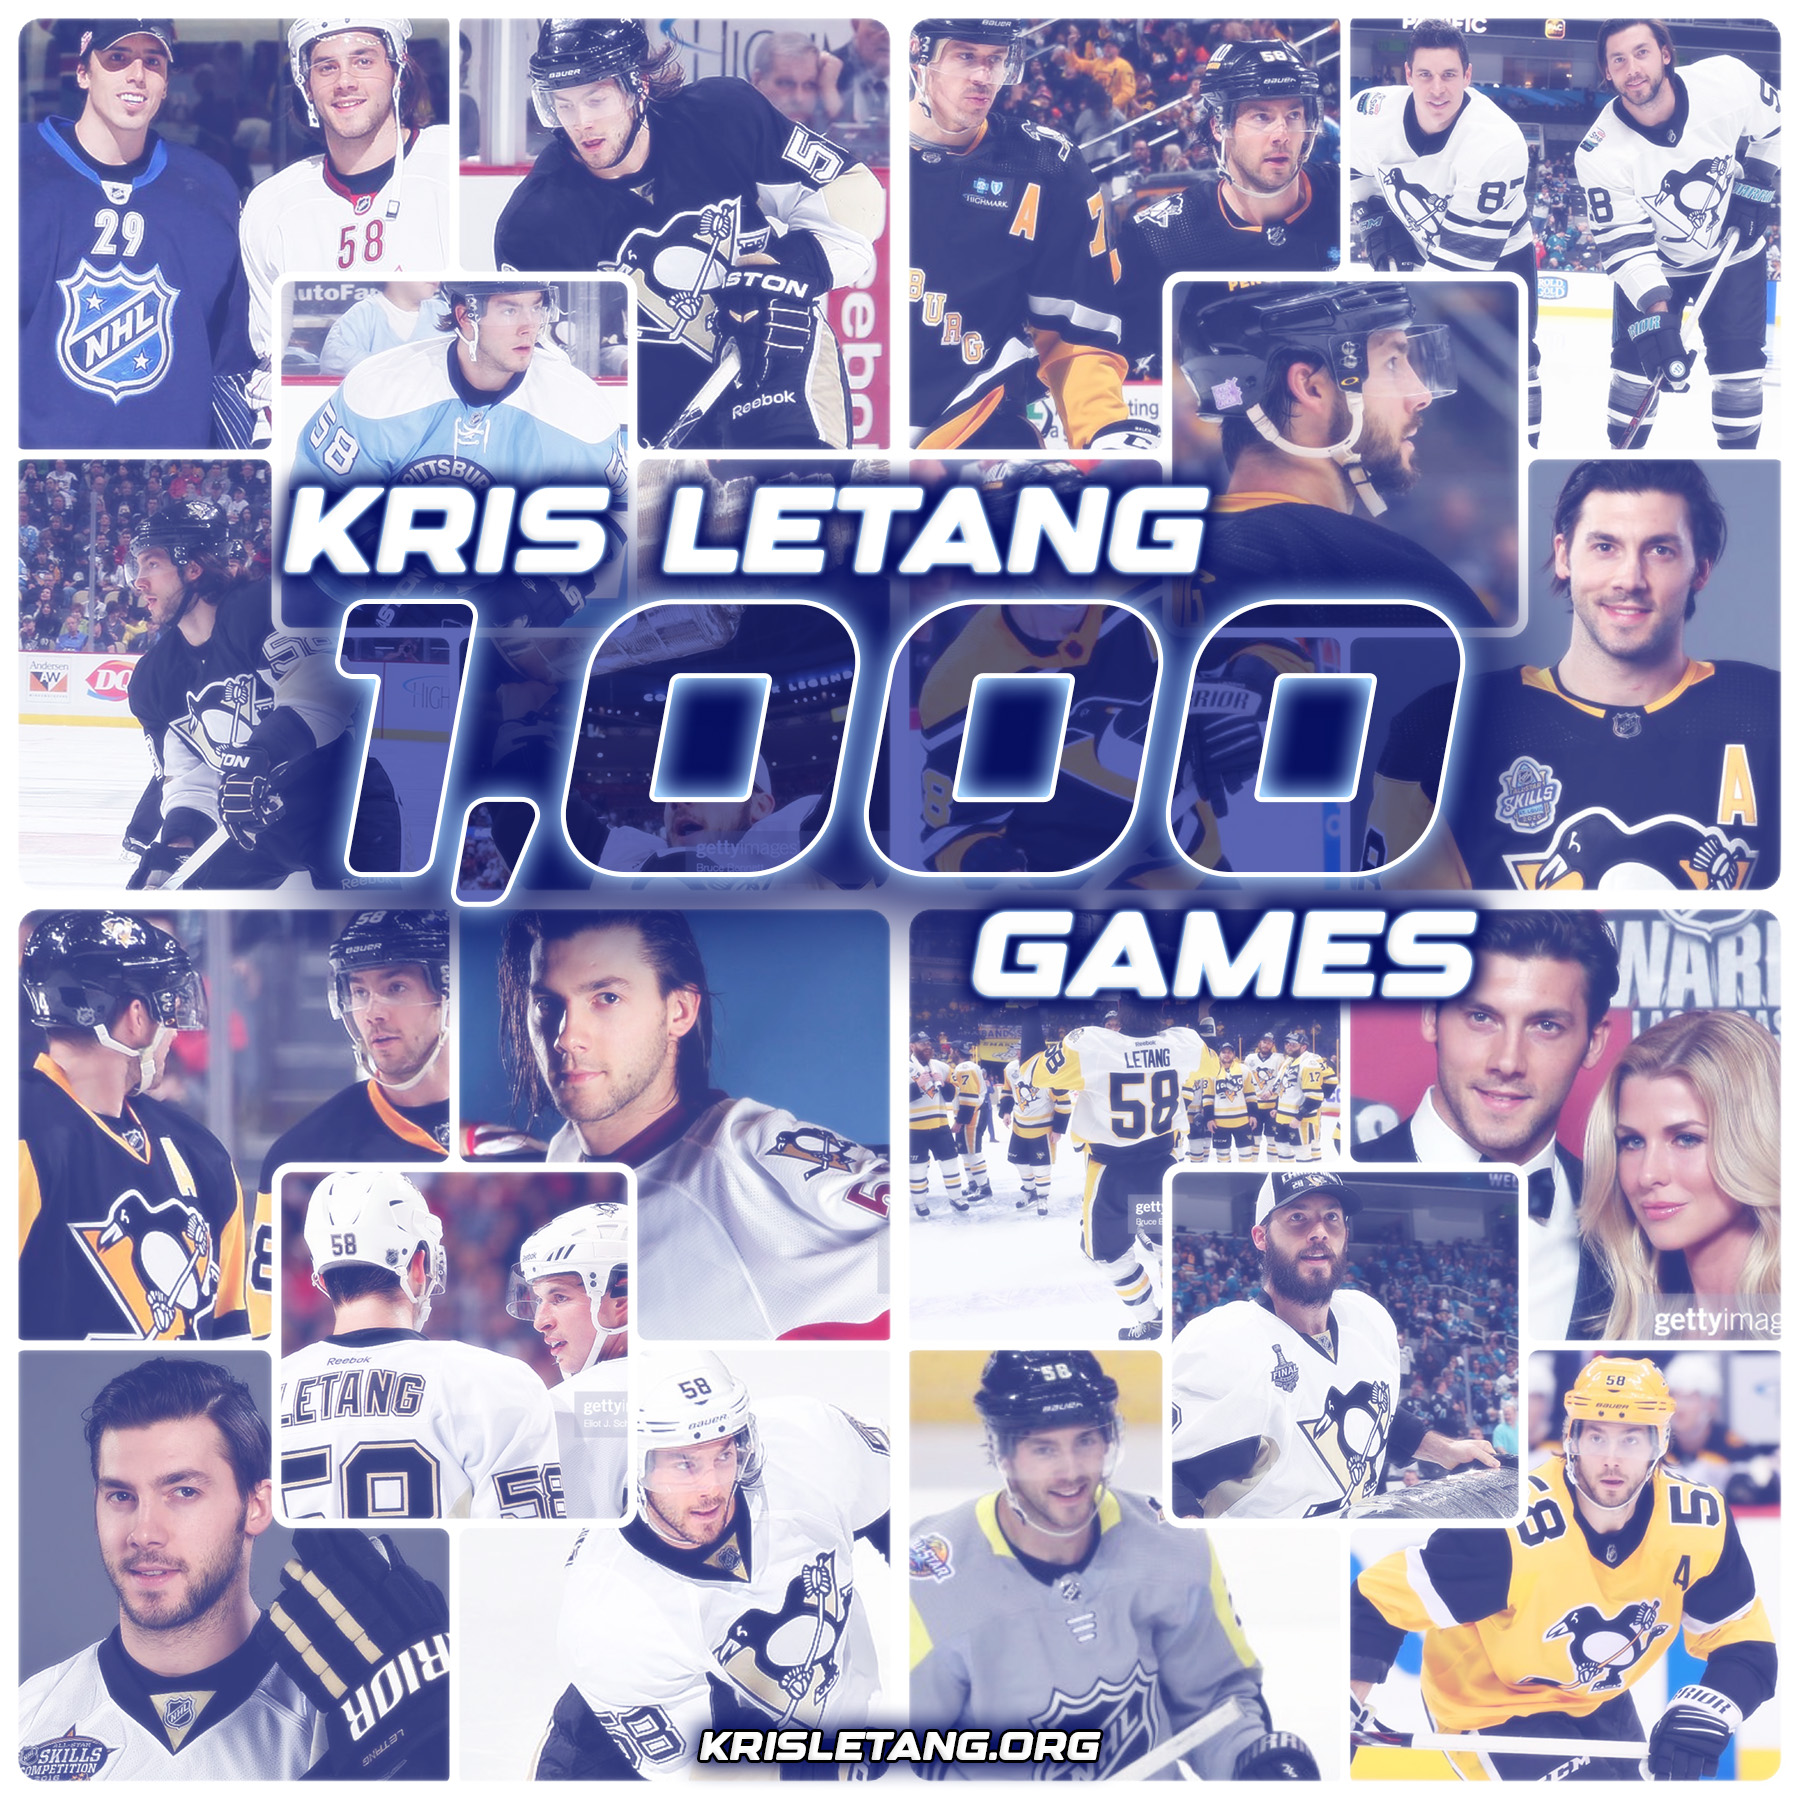 Kris Letang 1000 Games; Introspective on Time, & First Shift Goof-Up